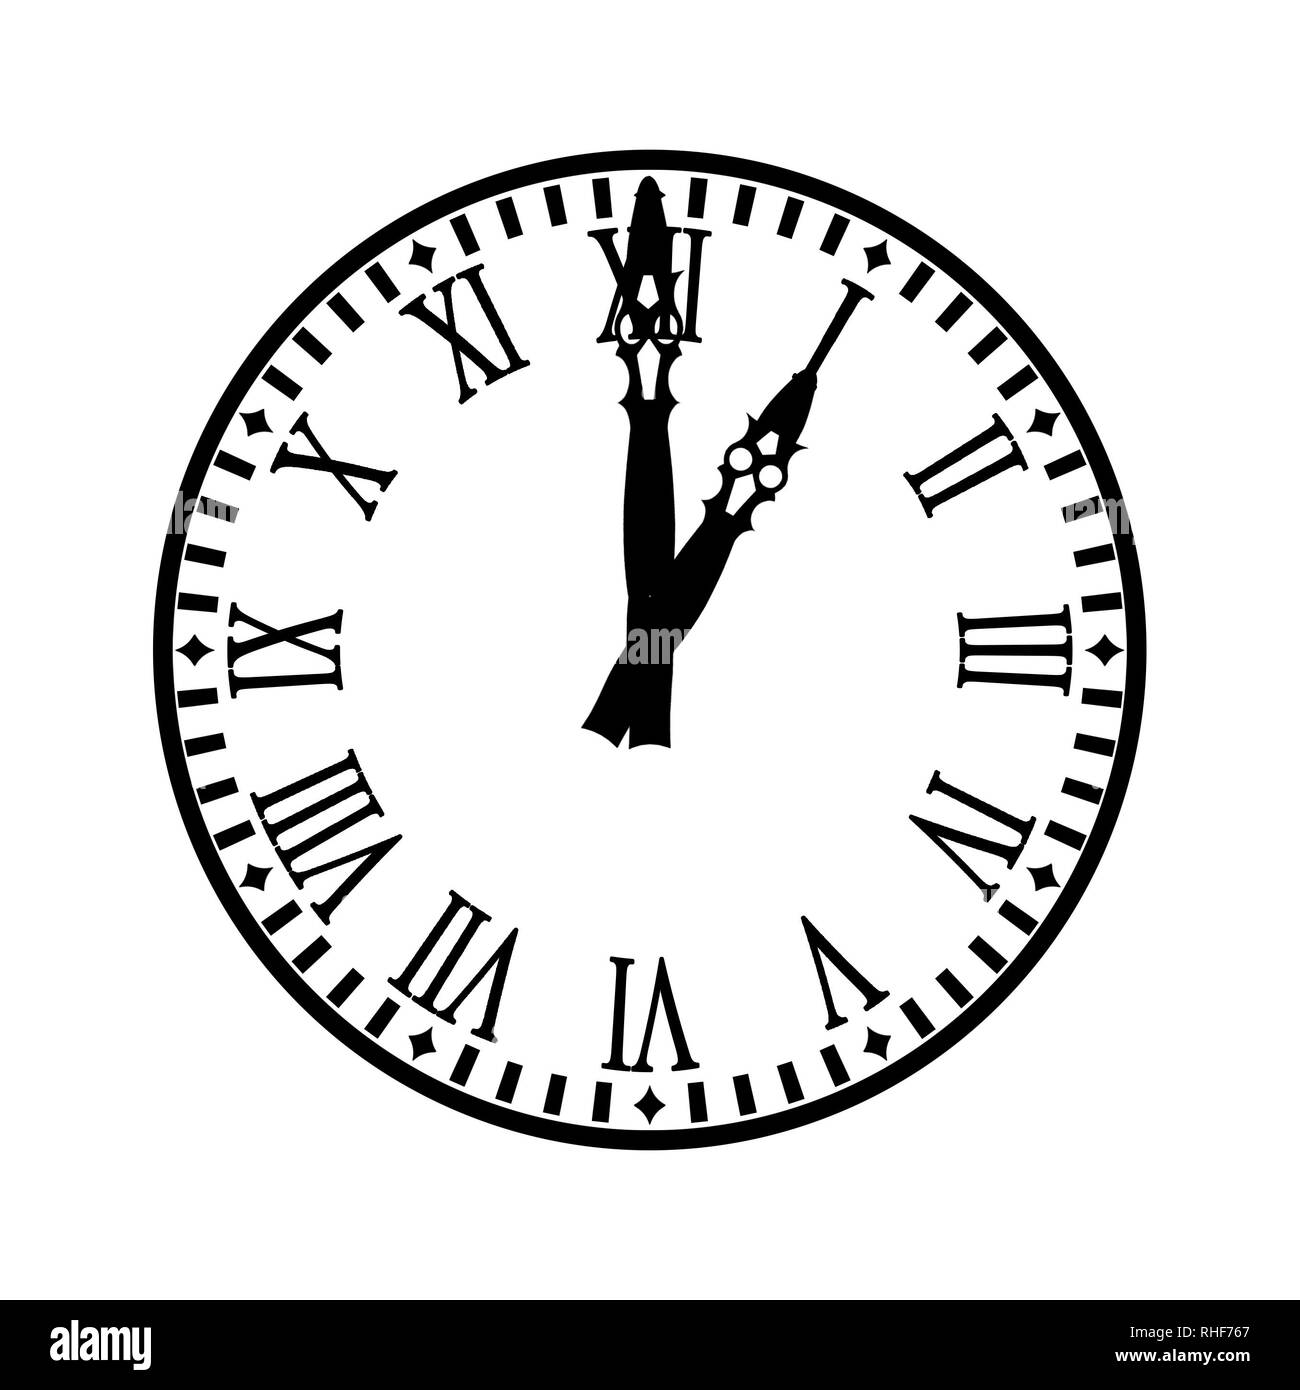 Clock with hour indicator and minute indicator, indicating one o'clock Stock Photo